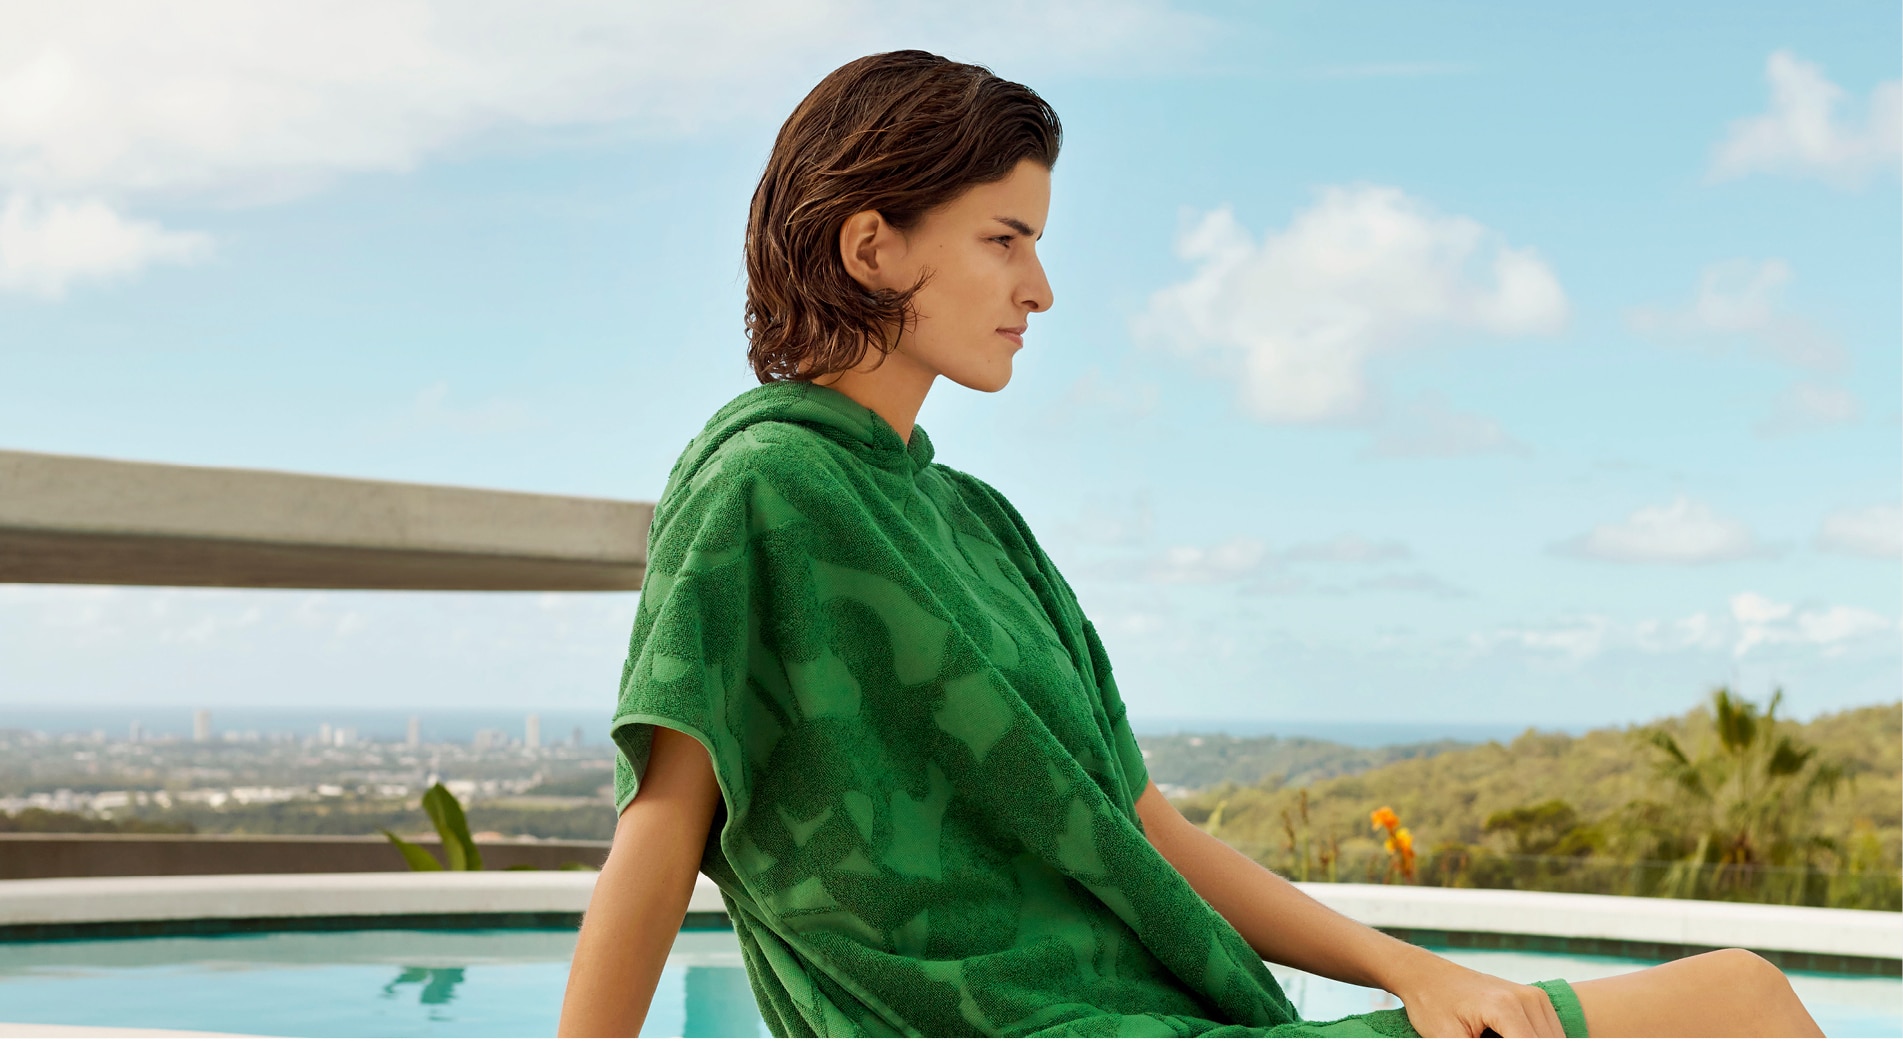 white woman with short brown hair sits in front of a pool, wearing a palm green hooded poncho with botanical design.